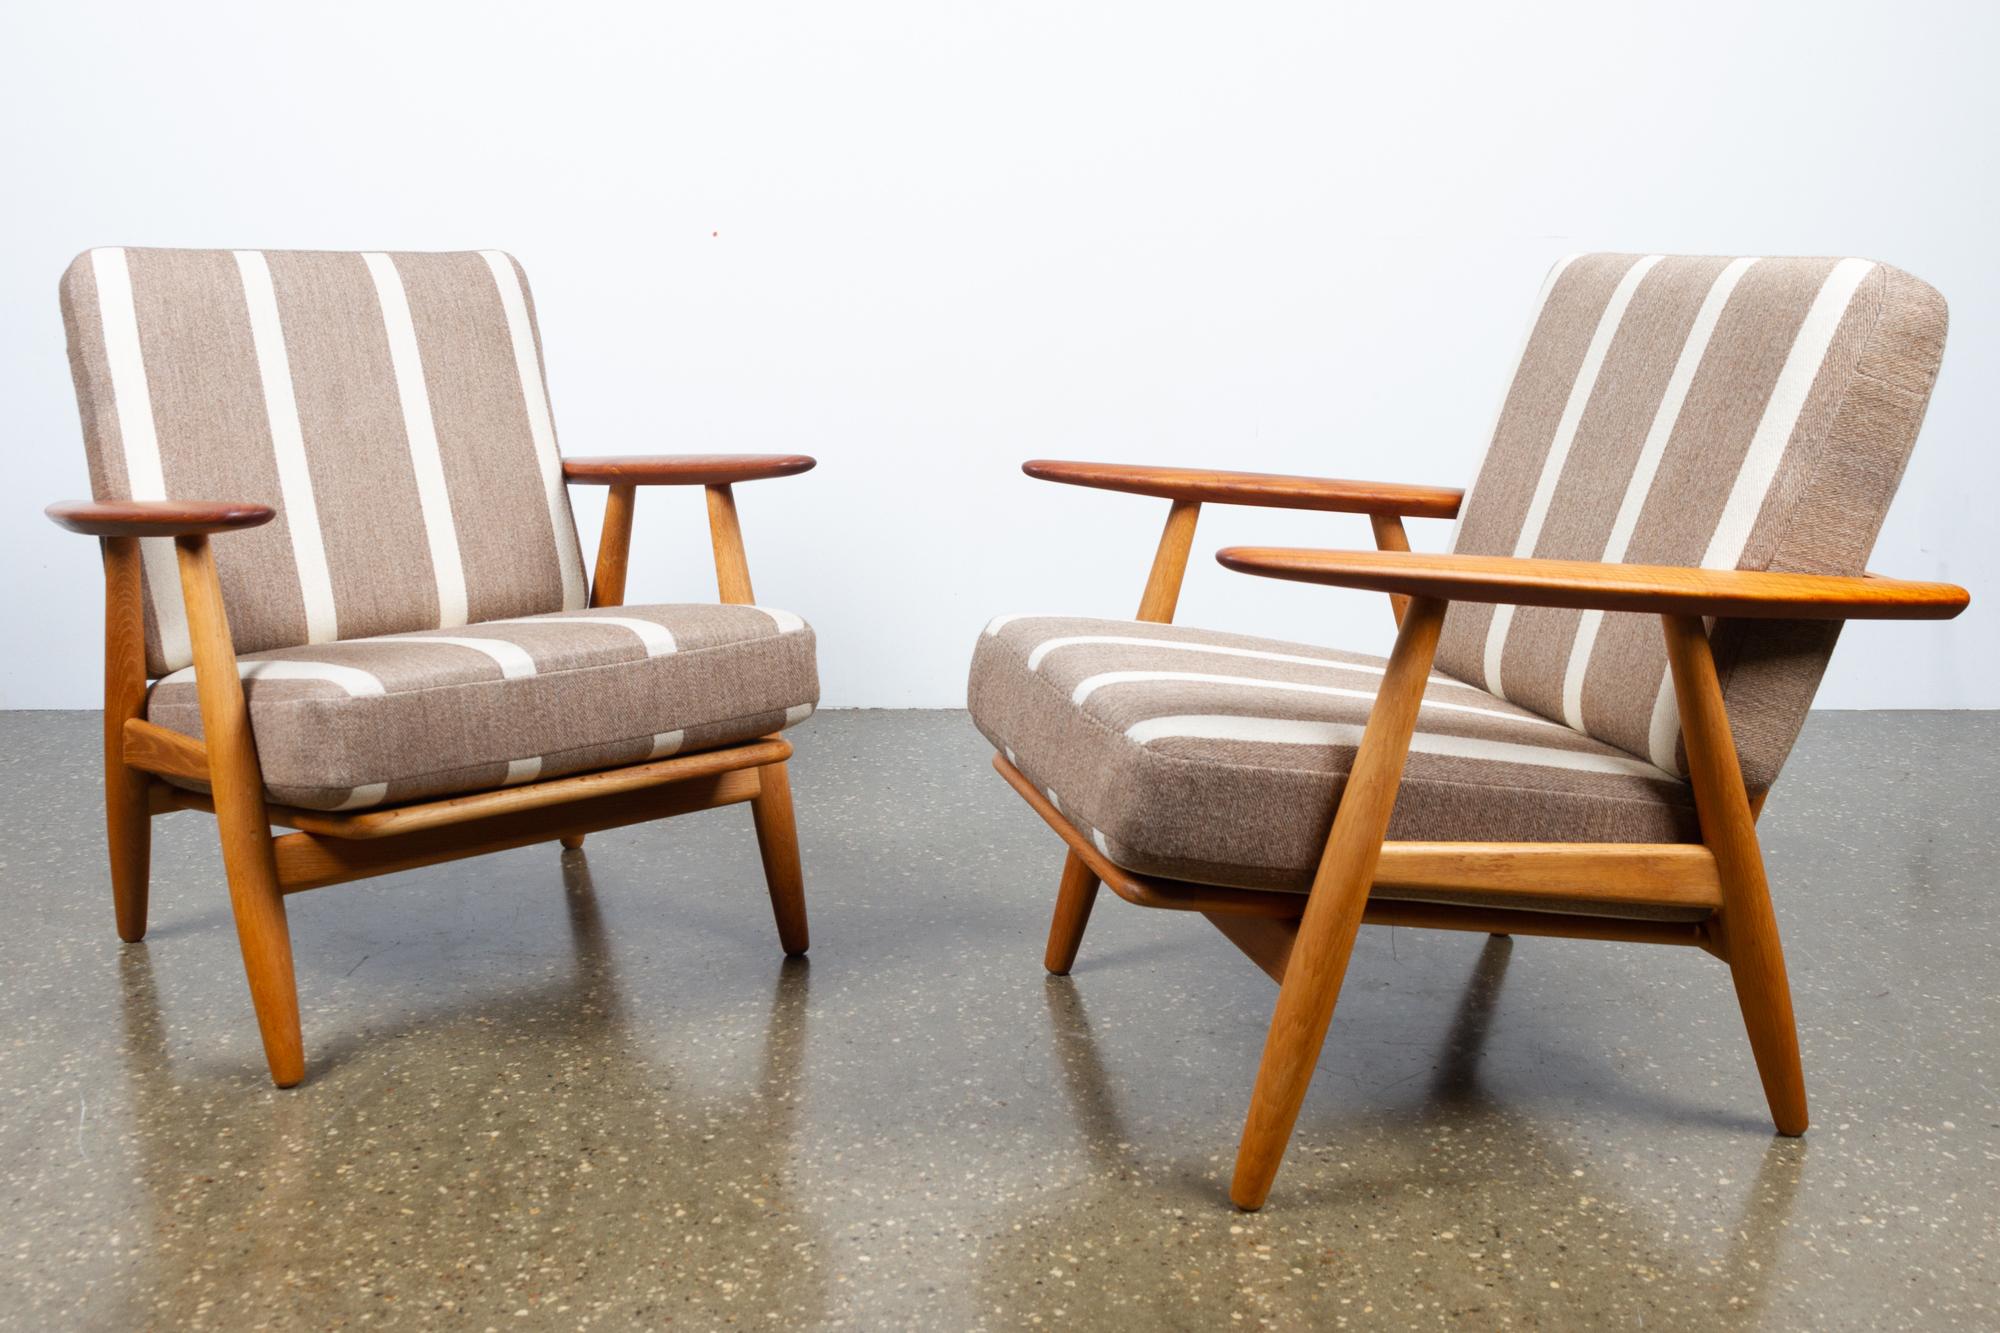 Cigar GE-240 Easy Chairs by Hans J. Wegner 1950s, Set of 2
Pair of two GE 240 armchairs in oak and teak by Hans J. Wegner for Getama Denmark. Original spring cushions with original grey and white striped wool fabric. Frame in solid oak, armrests in